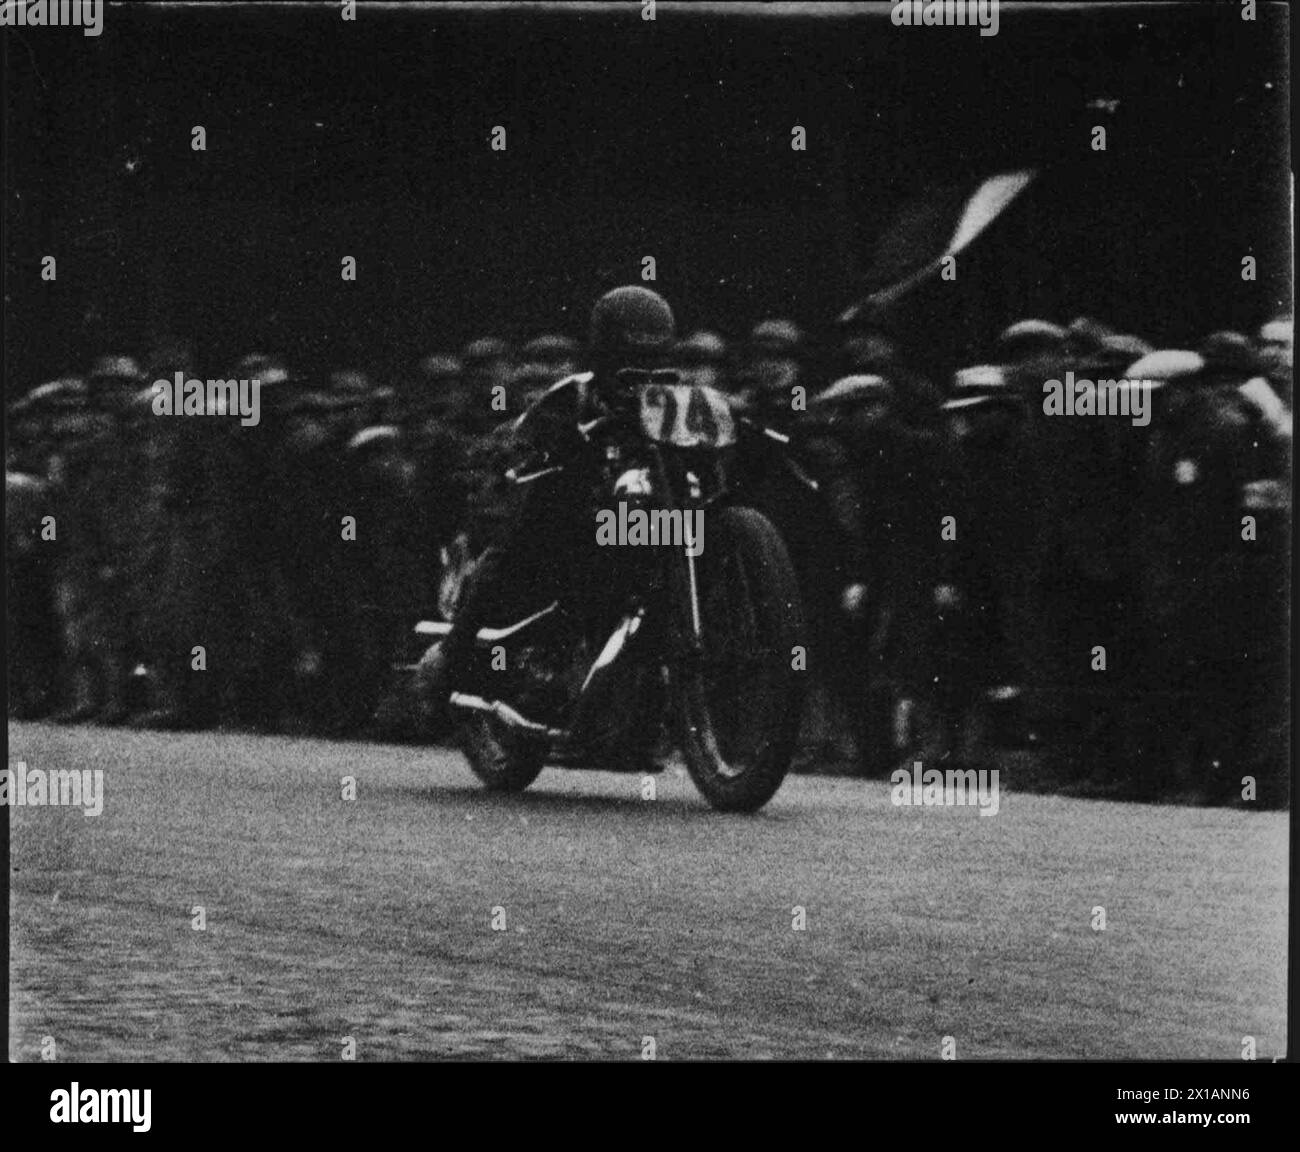 Chilometro Lancee in Neunkirchner avenue, il Engländer storey inglese realizzato con il suo "Brough Superior" 183, 7 km / h, 1929 - 19290101 PD3560 - Rechteinfo: Rights Managed (RM) Foto Stock